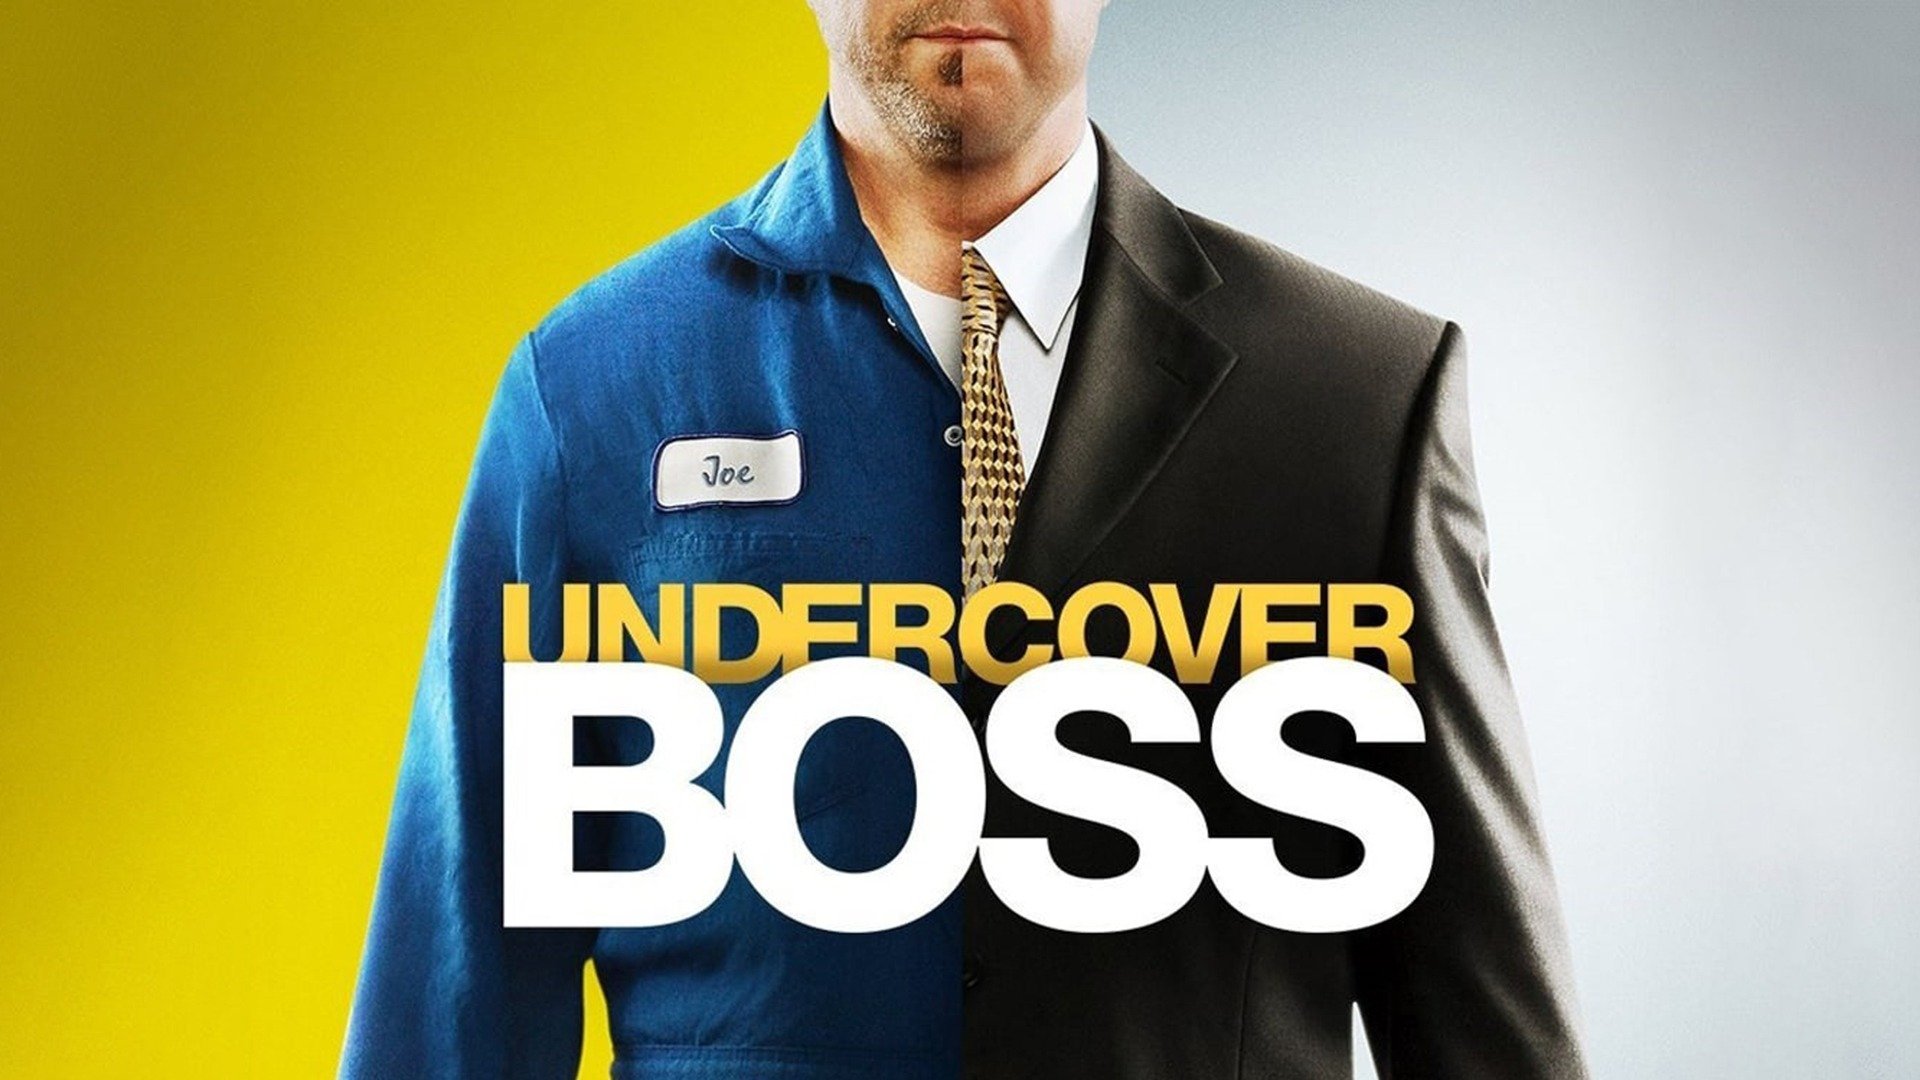 Undercover Boss - CBS Reality Series - Where To Watch